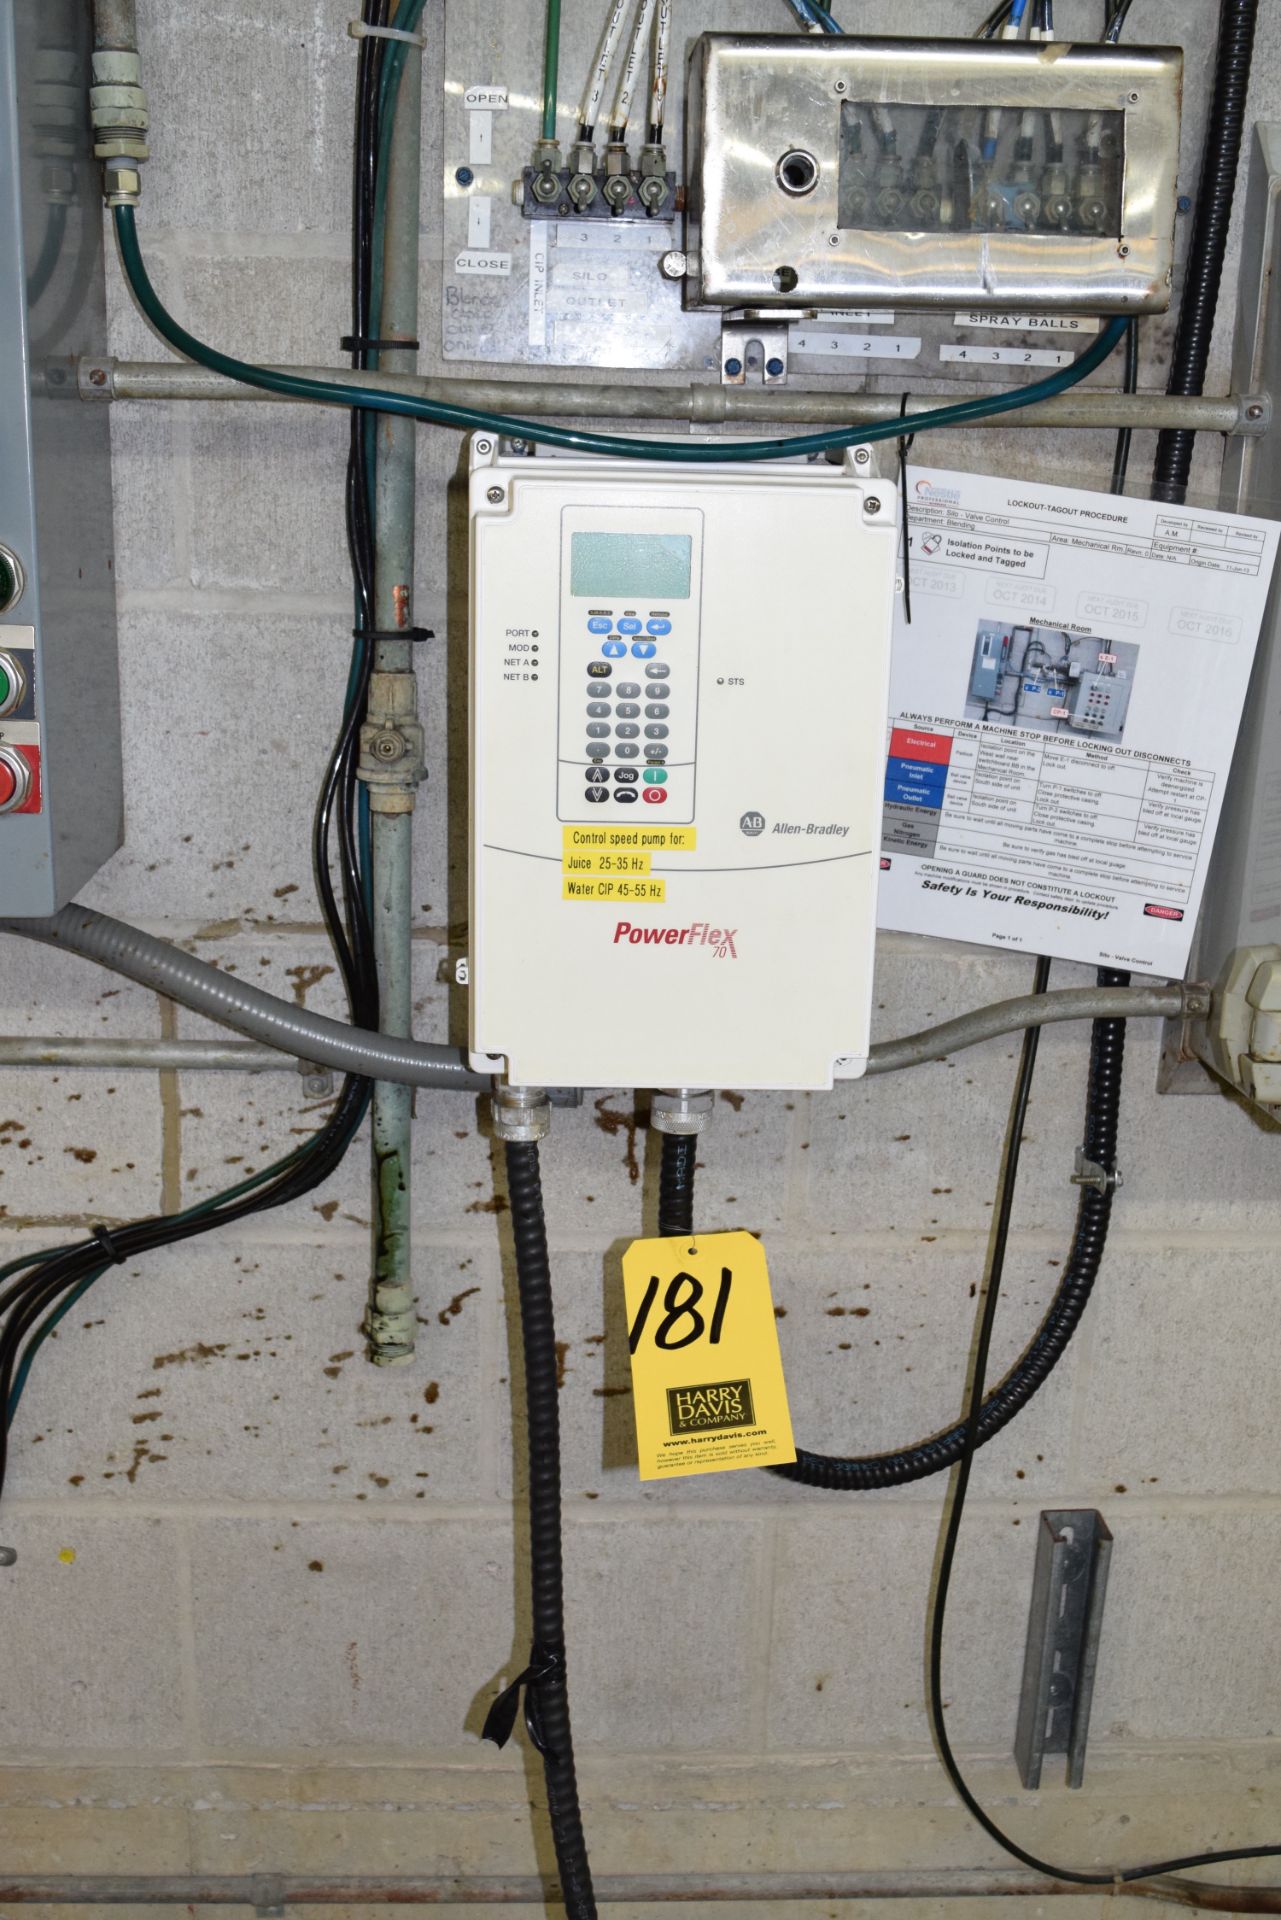 Allen Bradley Power Flex 70, 7.5 HP Variable Frequency Drives Rigging Charge:100 Skidding Charge:25